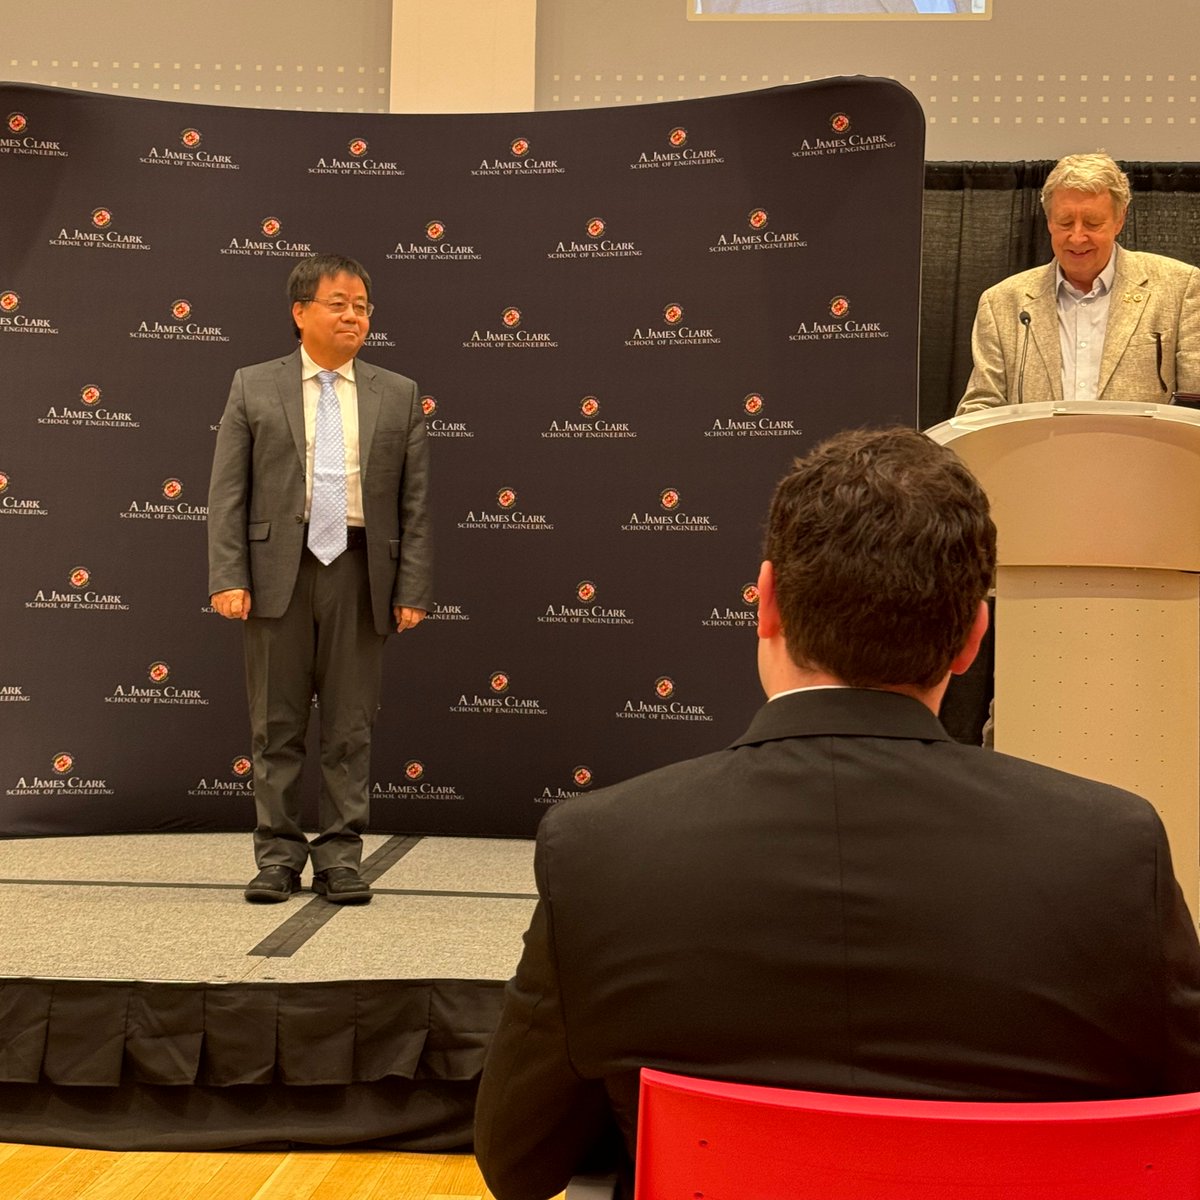 On Friday, @ClarkSchool held its faculty & staff awards. Congrats to the FI faculty awarded 👏 @KuoLab (Poole & Kent Teaching Award for Senior Faculty) @GreggADuncan (E. Robert Kent Teaching Award for Junior Faculty) Chunsheng Wang (Senior Faculty Outstanding Research Award)